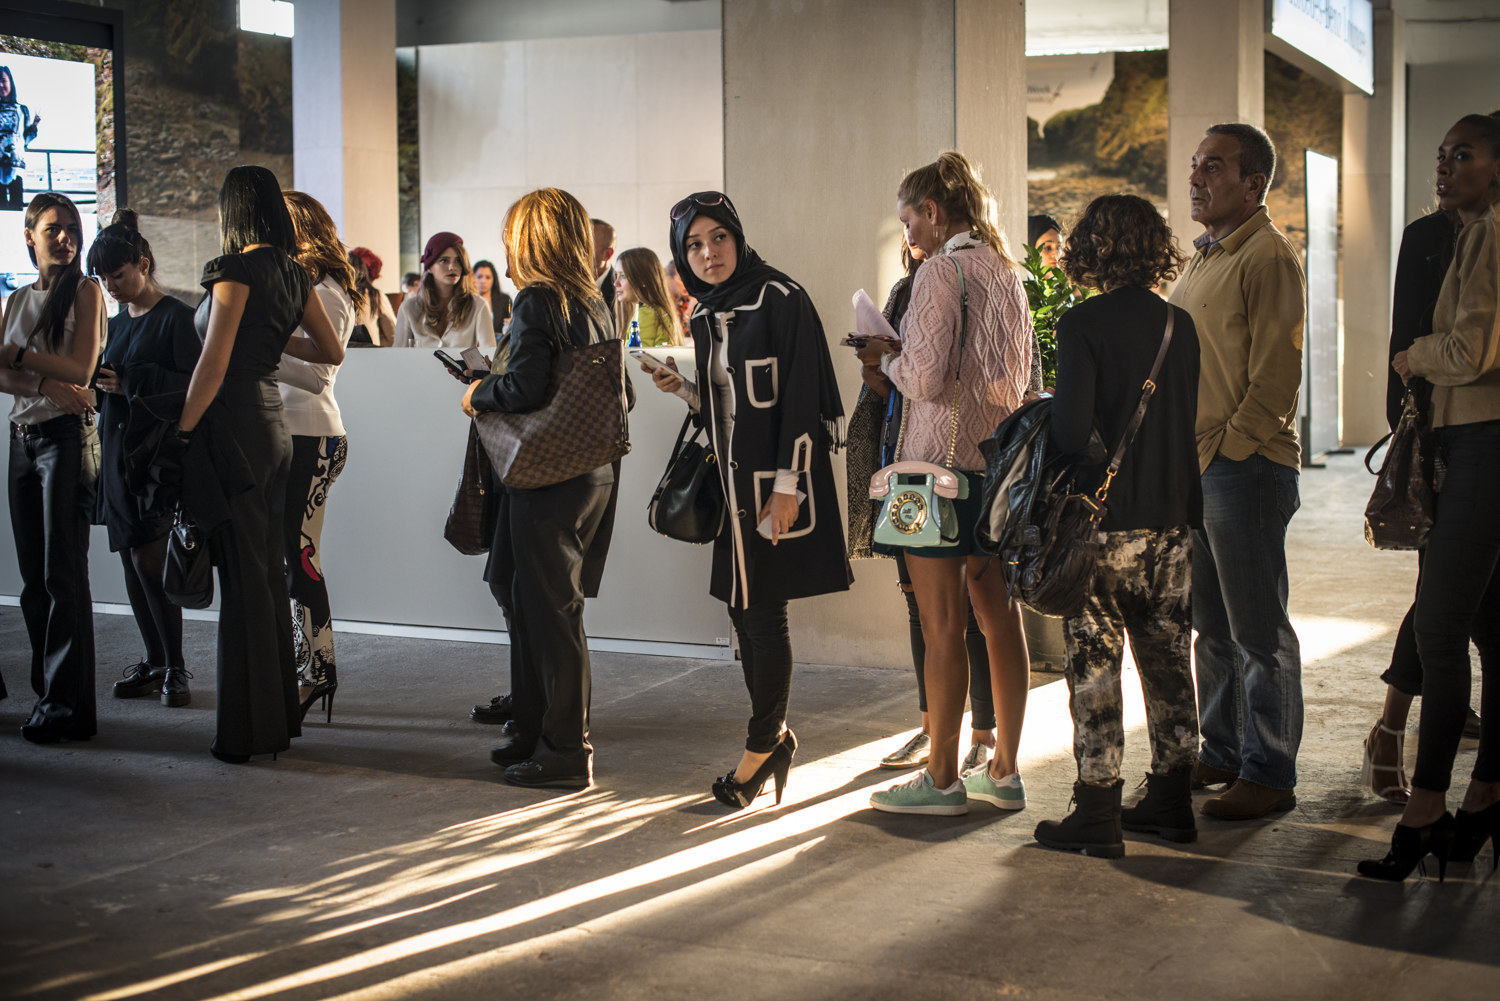  Show goers before the DB Berdan show at S/S 2015 Istanbul Fashion Week. 